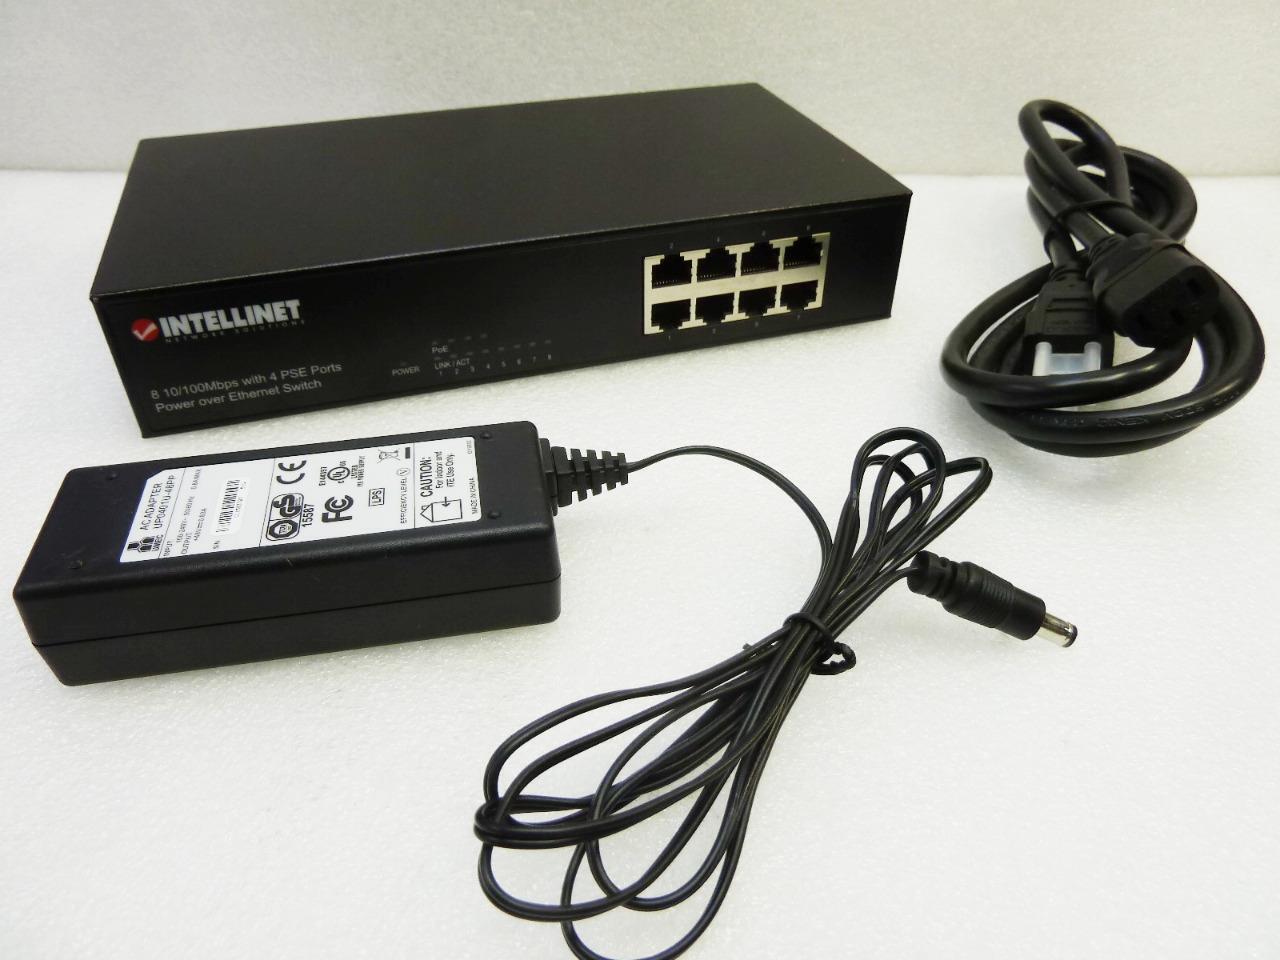 Intellinet 8-Port 10/100Mbps w/ 4 PSE Ports Power over Ethernet Switch | 560399